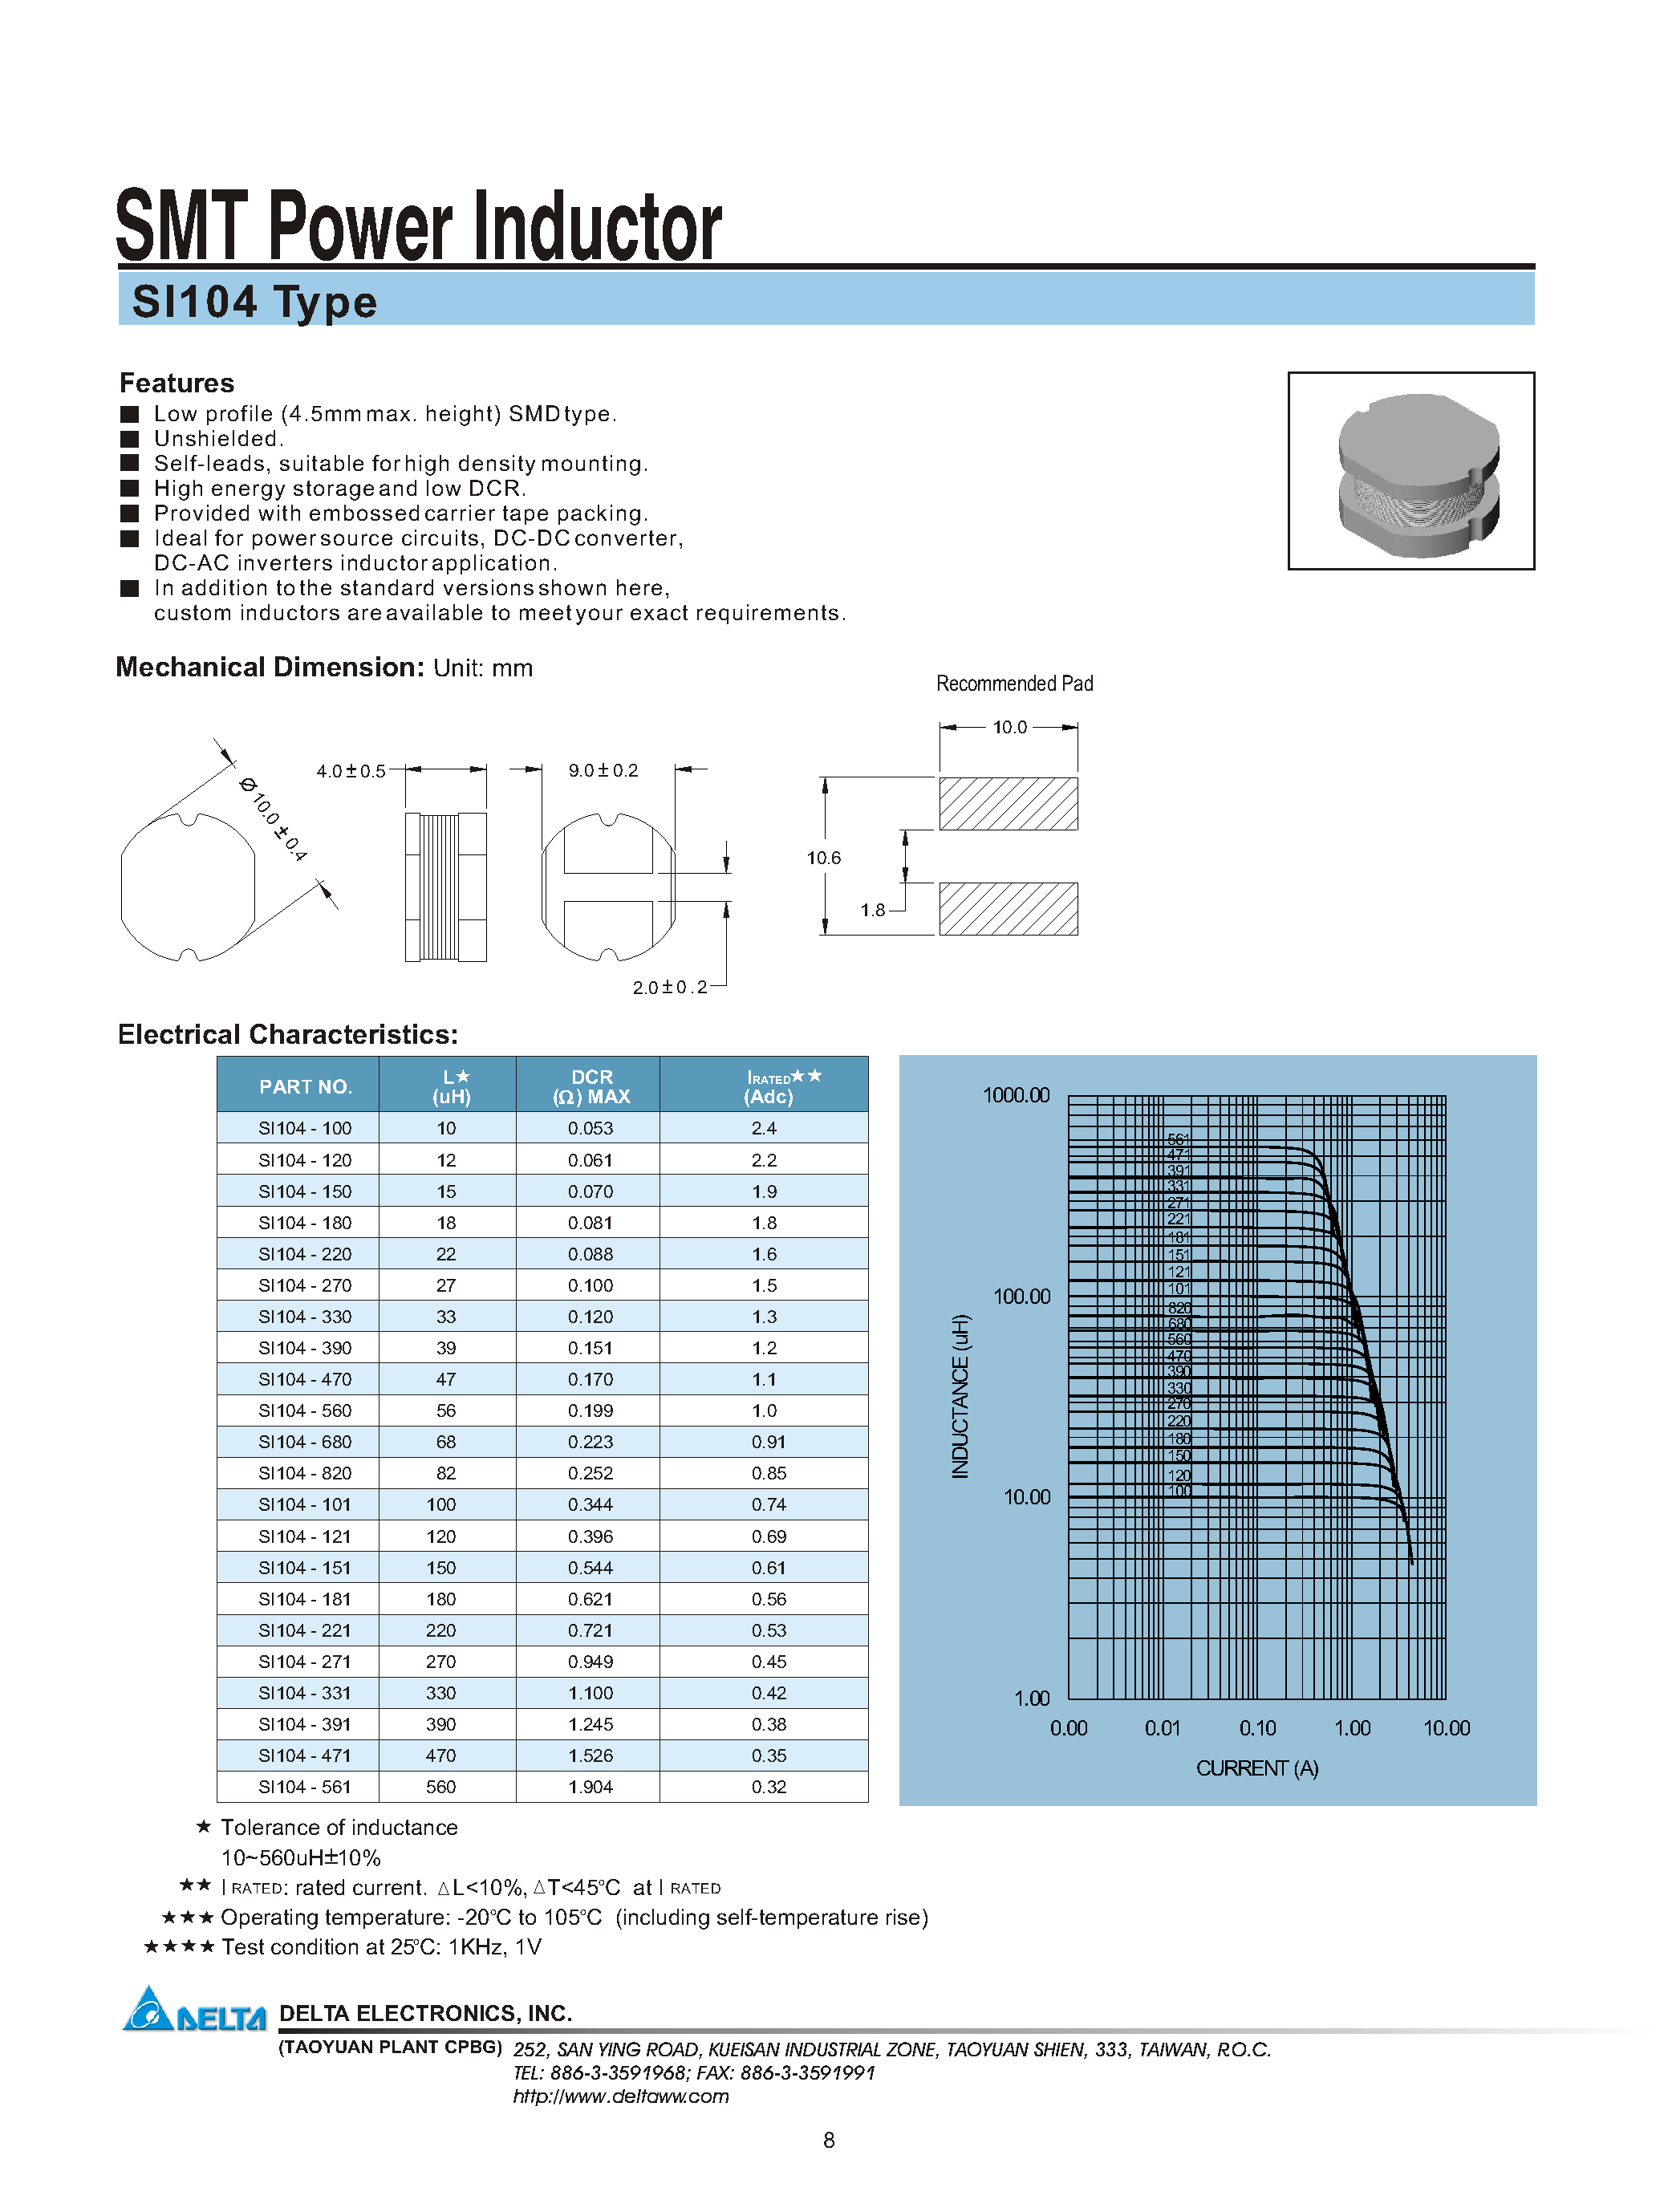 Datasheet SI104-820 - SMT Power Inductor page 1